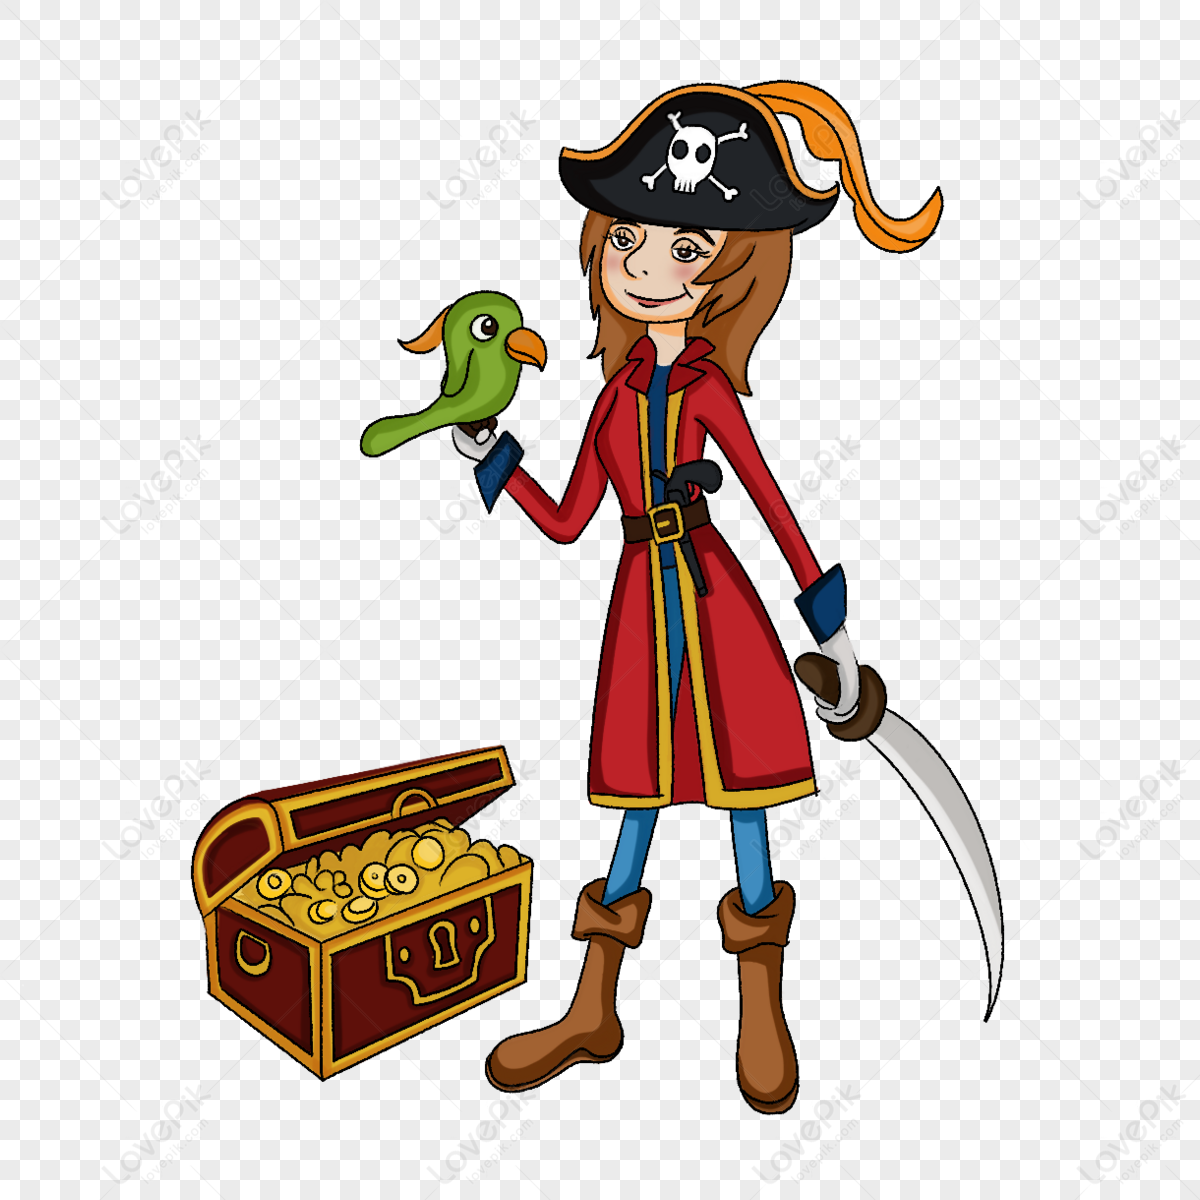 Pirate Next To Treasure Chest Clipart,pirate Costumes,pirate Sword Free ...